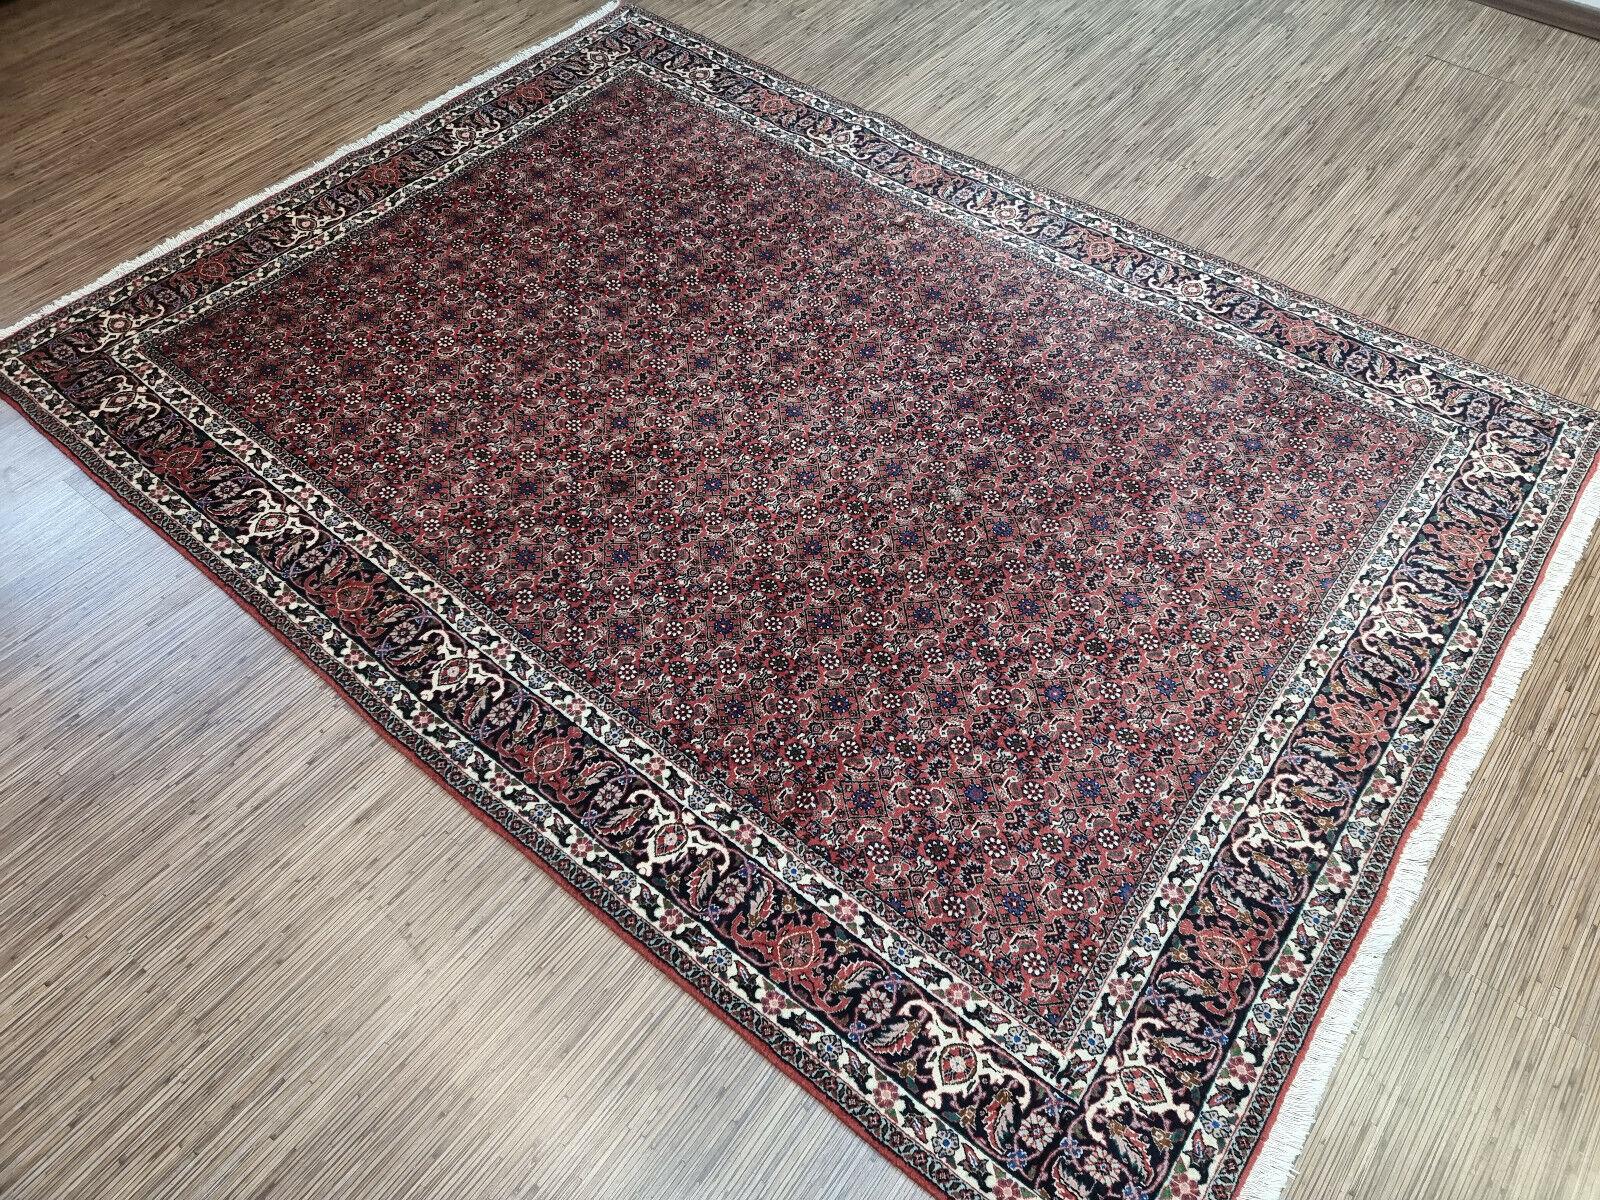 Transform your space with our Handmade Vintage Persian Style Bidjar Rug. This stunning rug is a masterpiece of craftsmanship and design, dating back to the 1970s. It measures 5.7’ x 7.8’, making it ideal for large spaces or as a centerpiece.

The